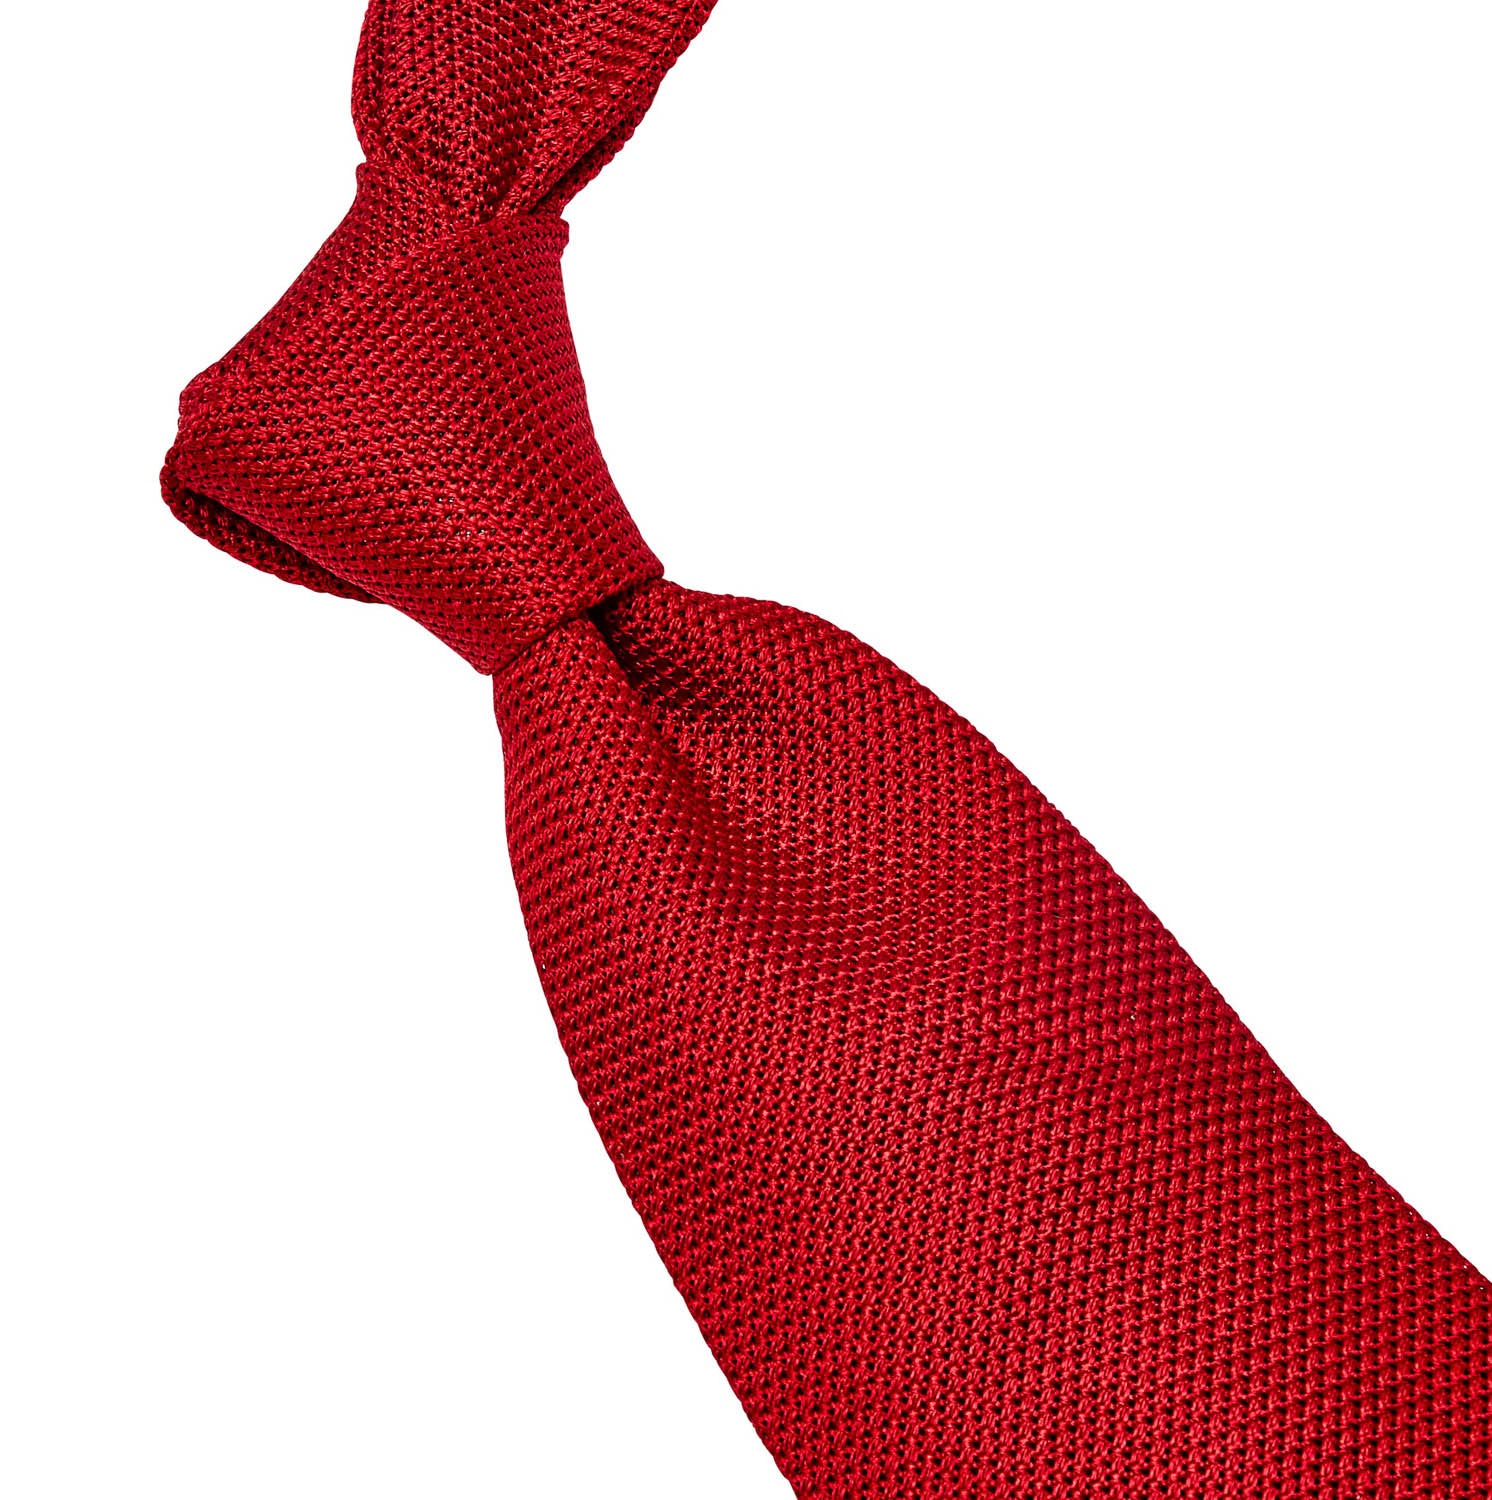 A handmade Sovereign Grade Grenadine Fina Red Tie from KirbyAllison.com on a white background, representing quality from the United Kingdom.